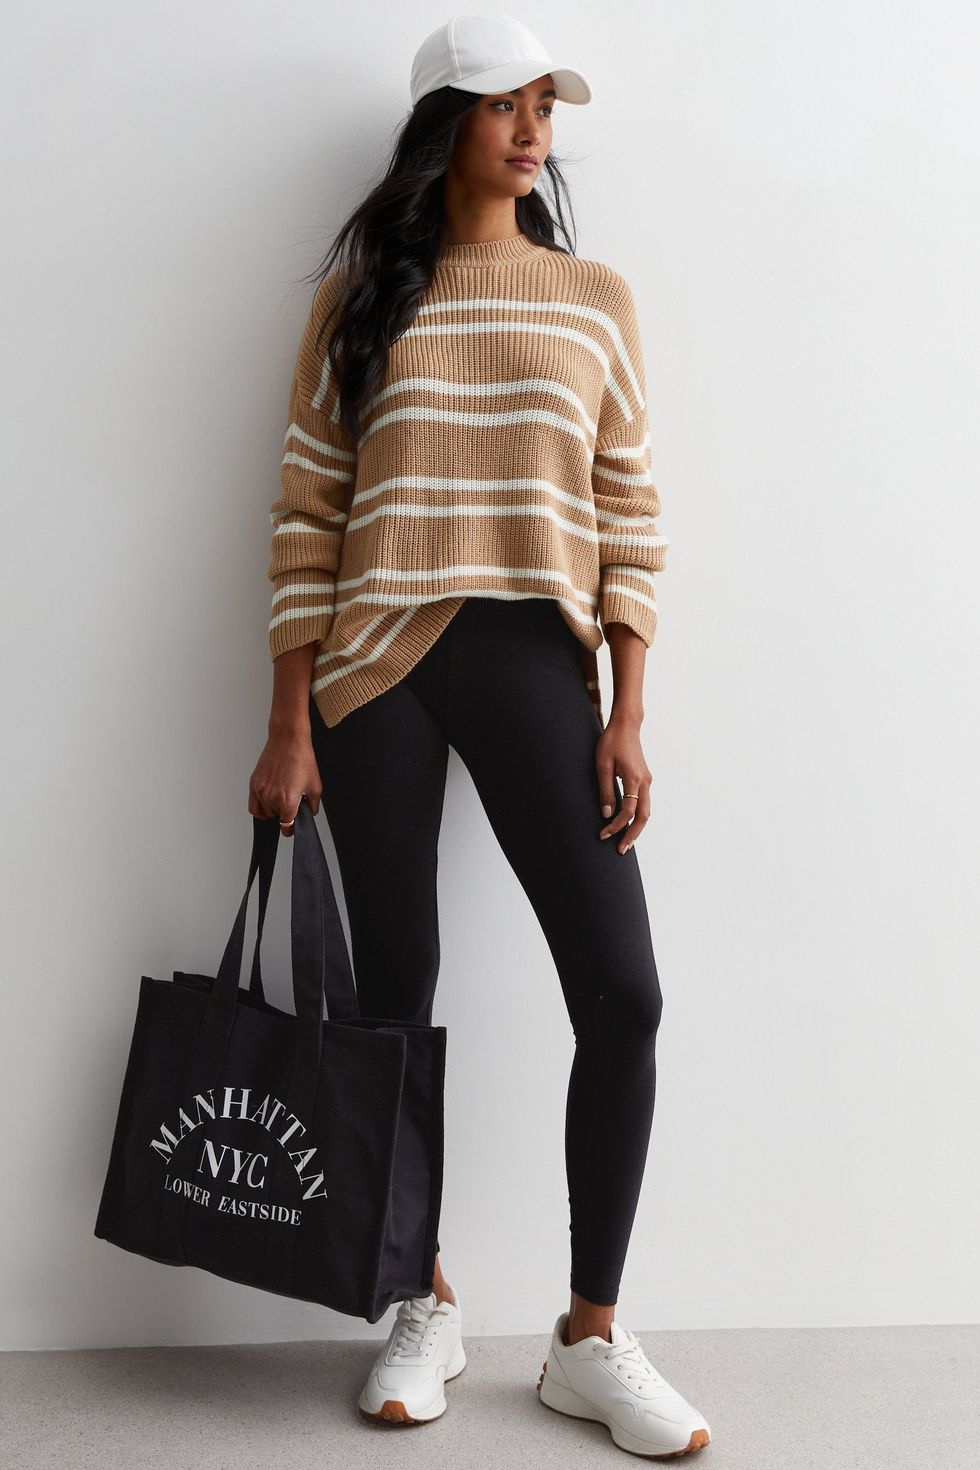 Oversized Sweater with Leggings Outfits (65 ideas & outfits